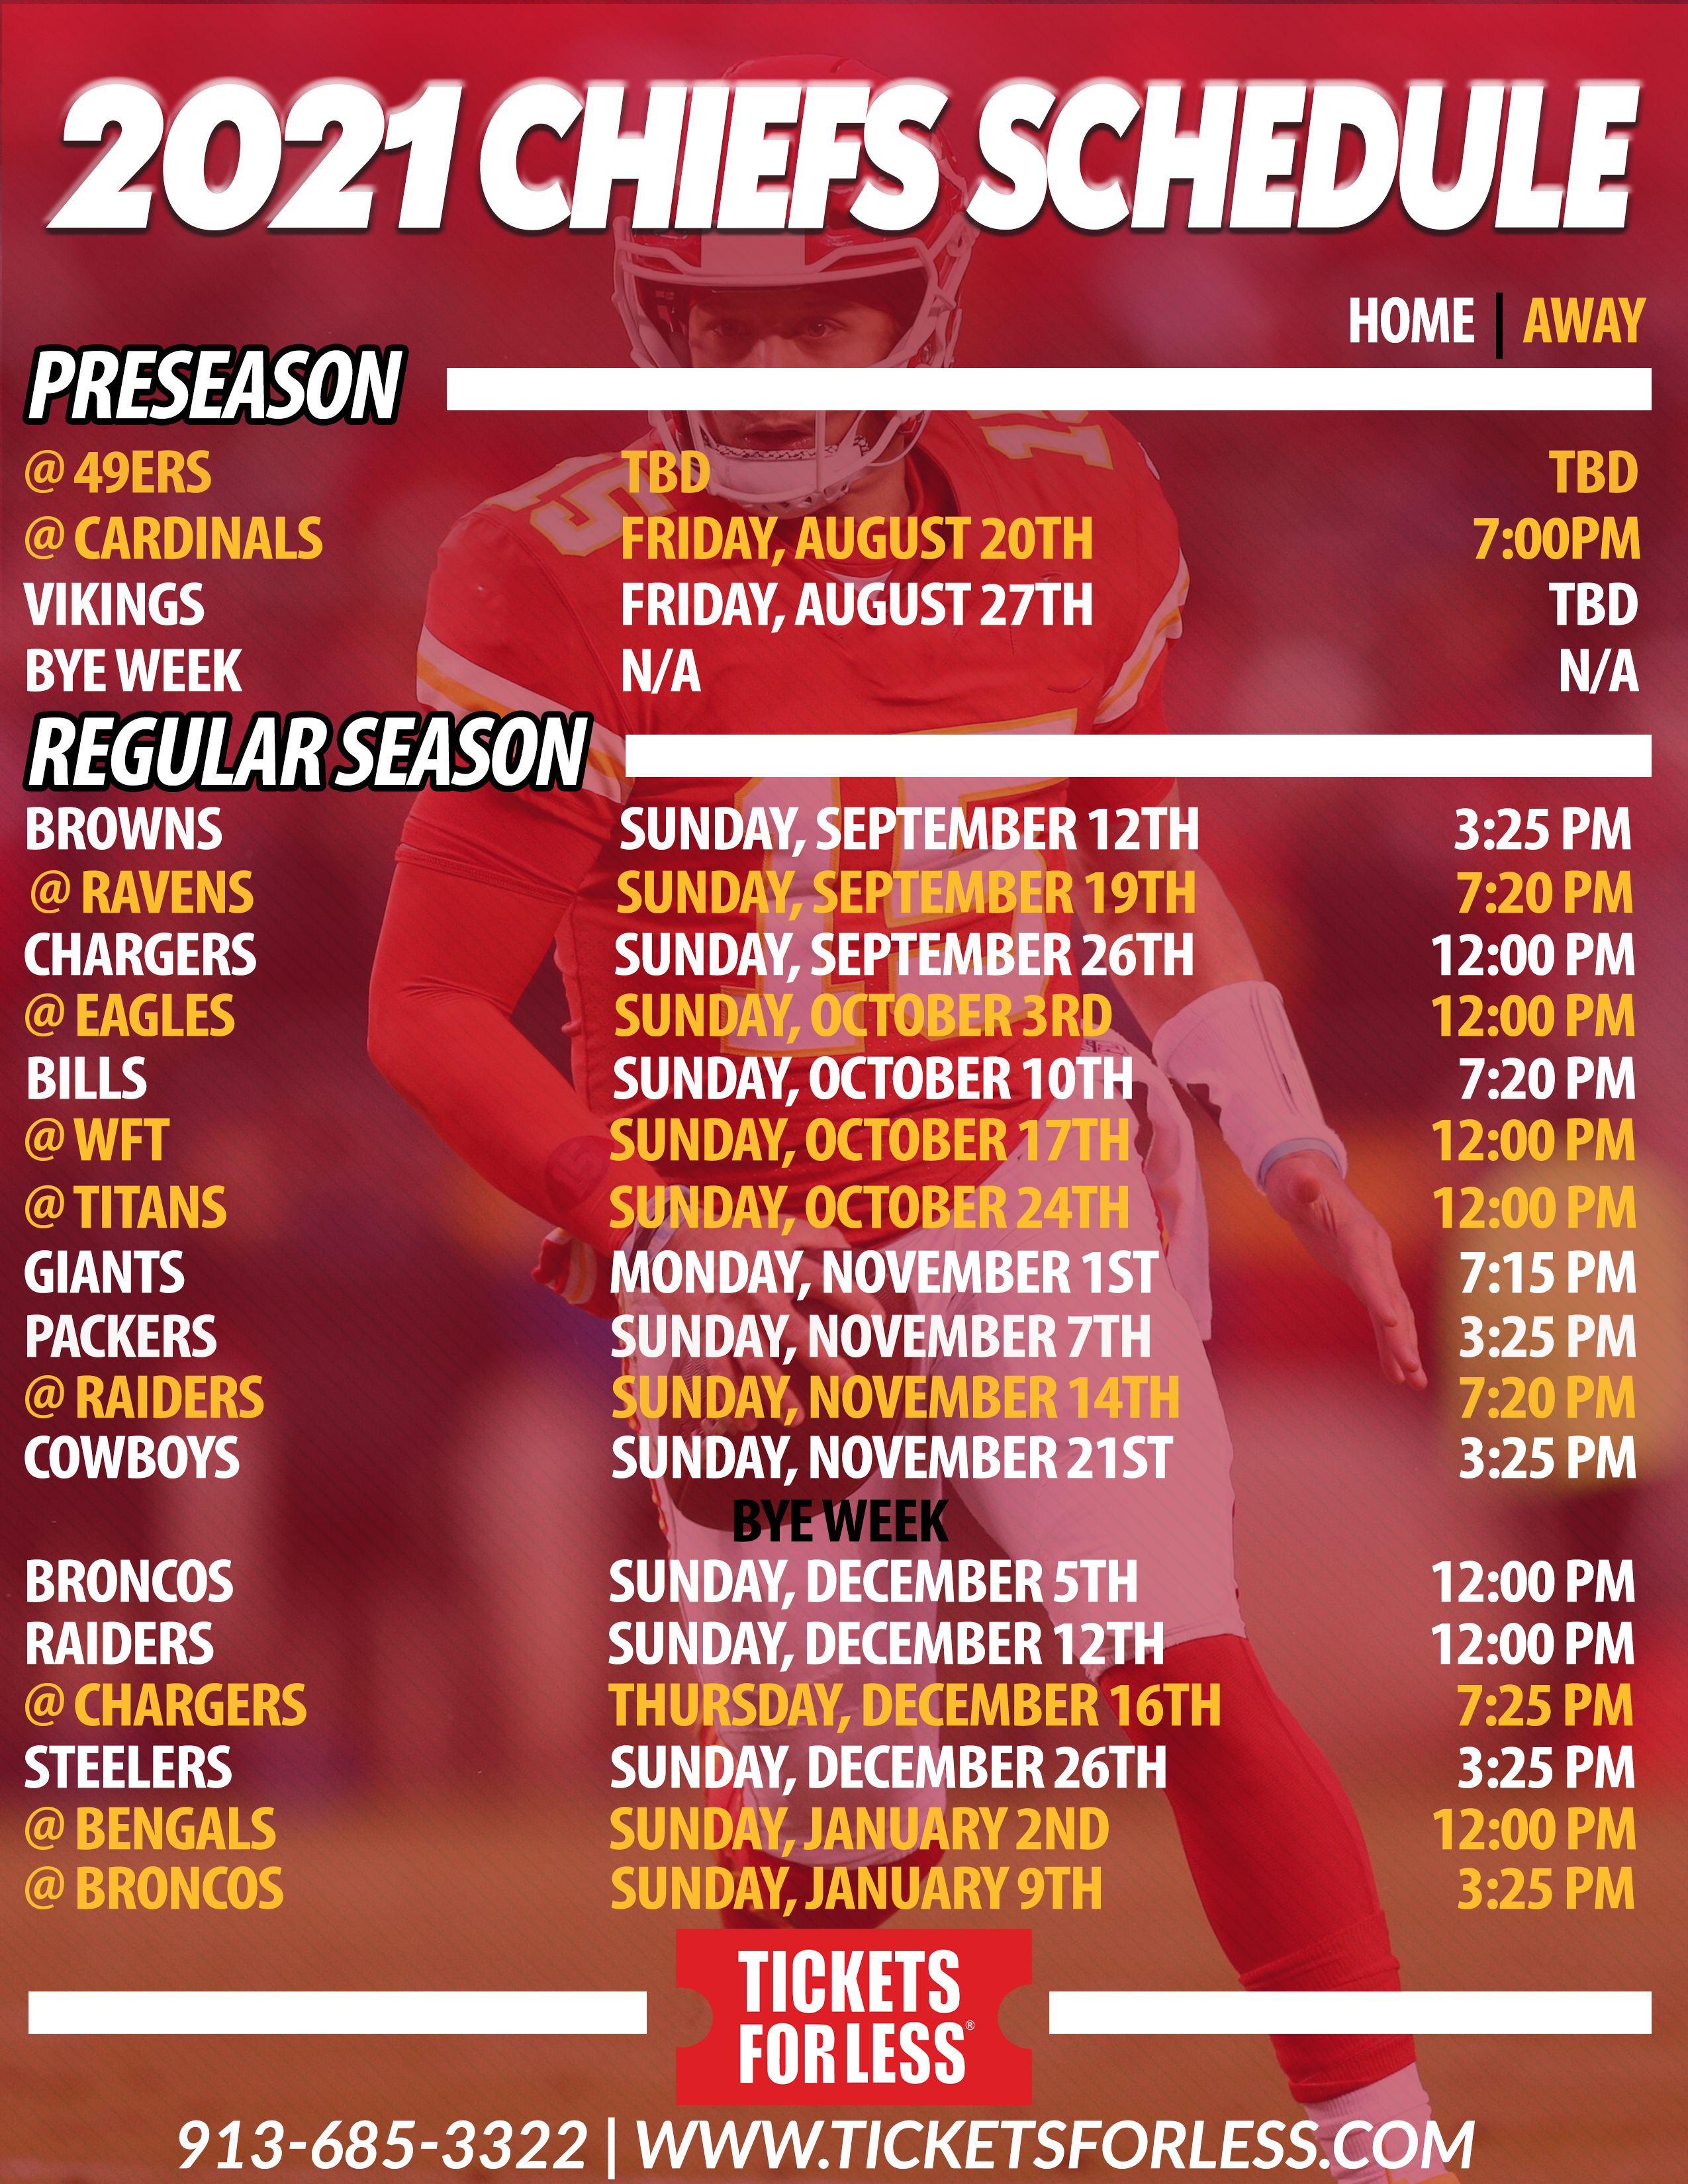 2021 Chiefs Schedule - Chiefs Tickets For Less